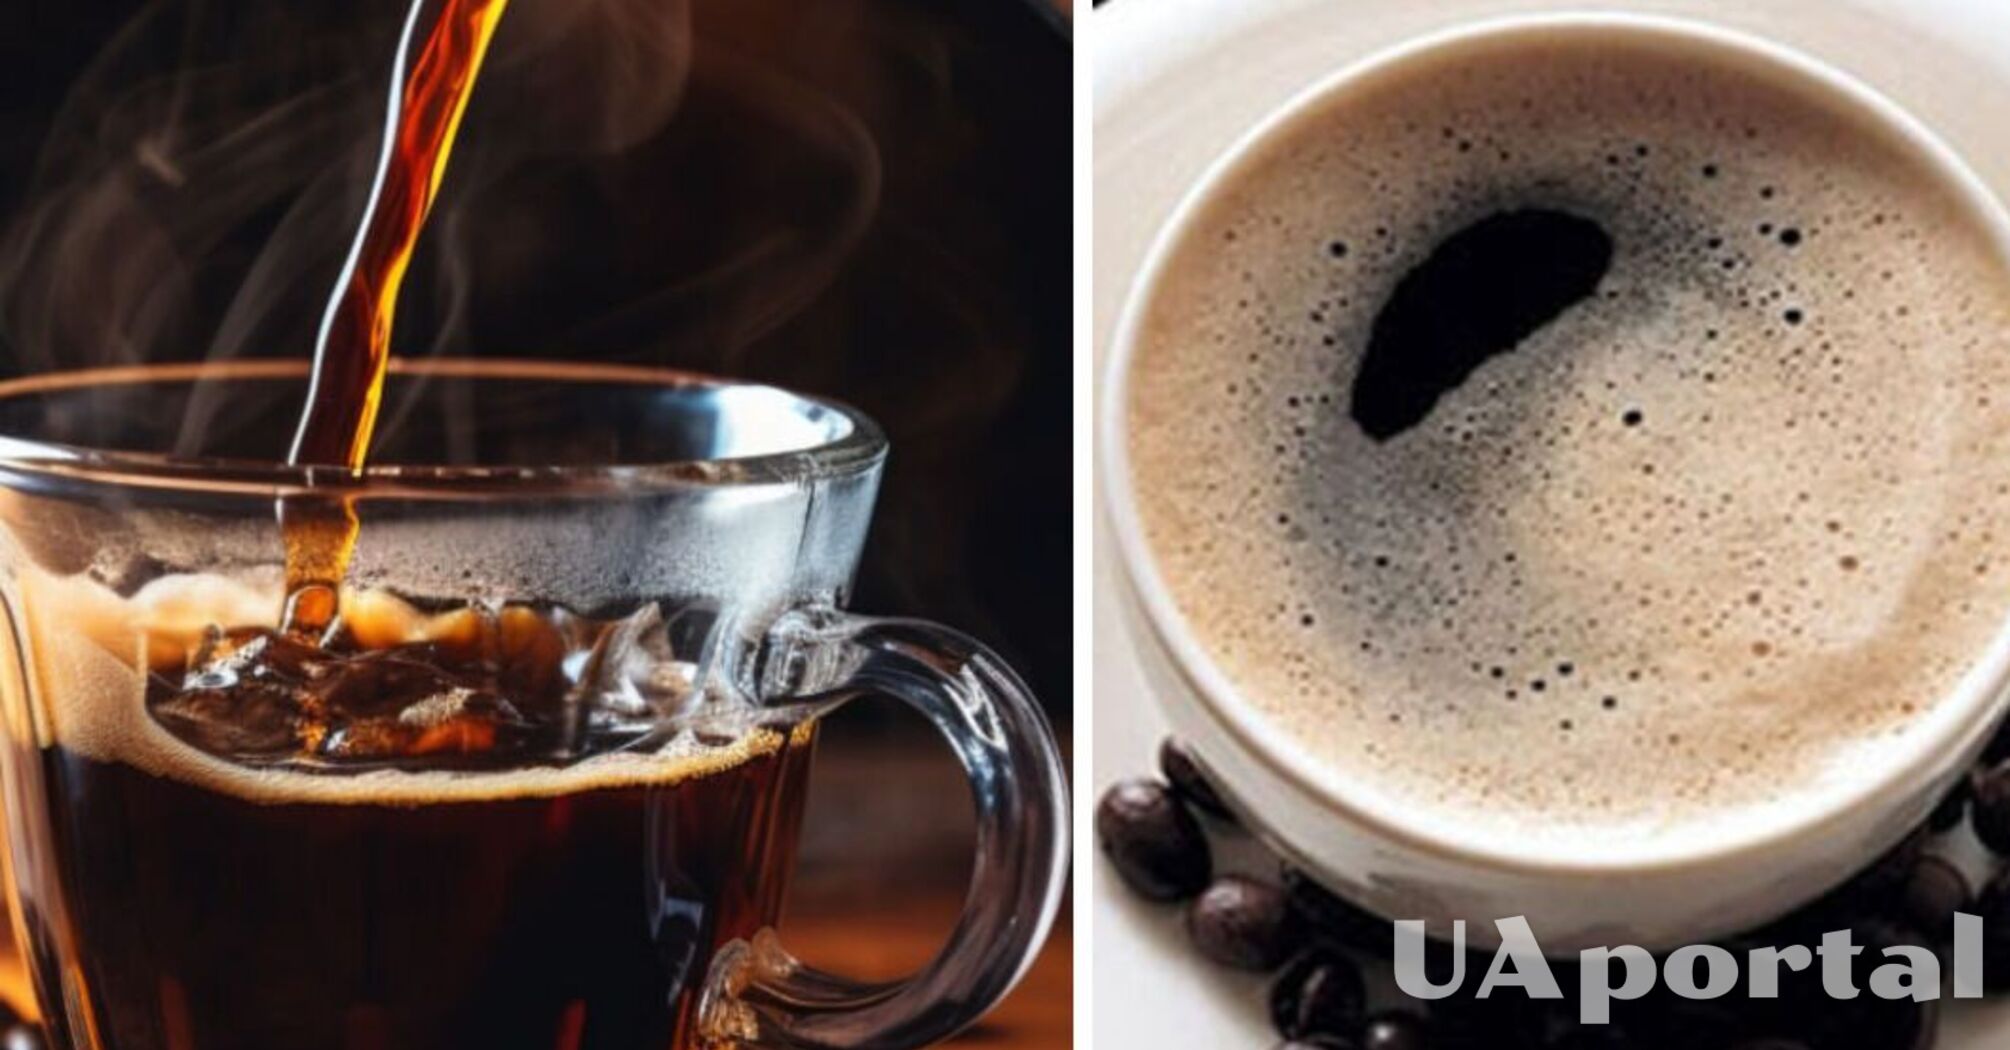 Promotes weight loss and improves health: why you should drink a cup of coffee a day